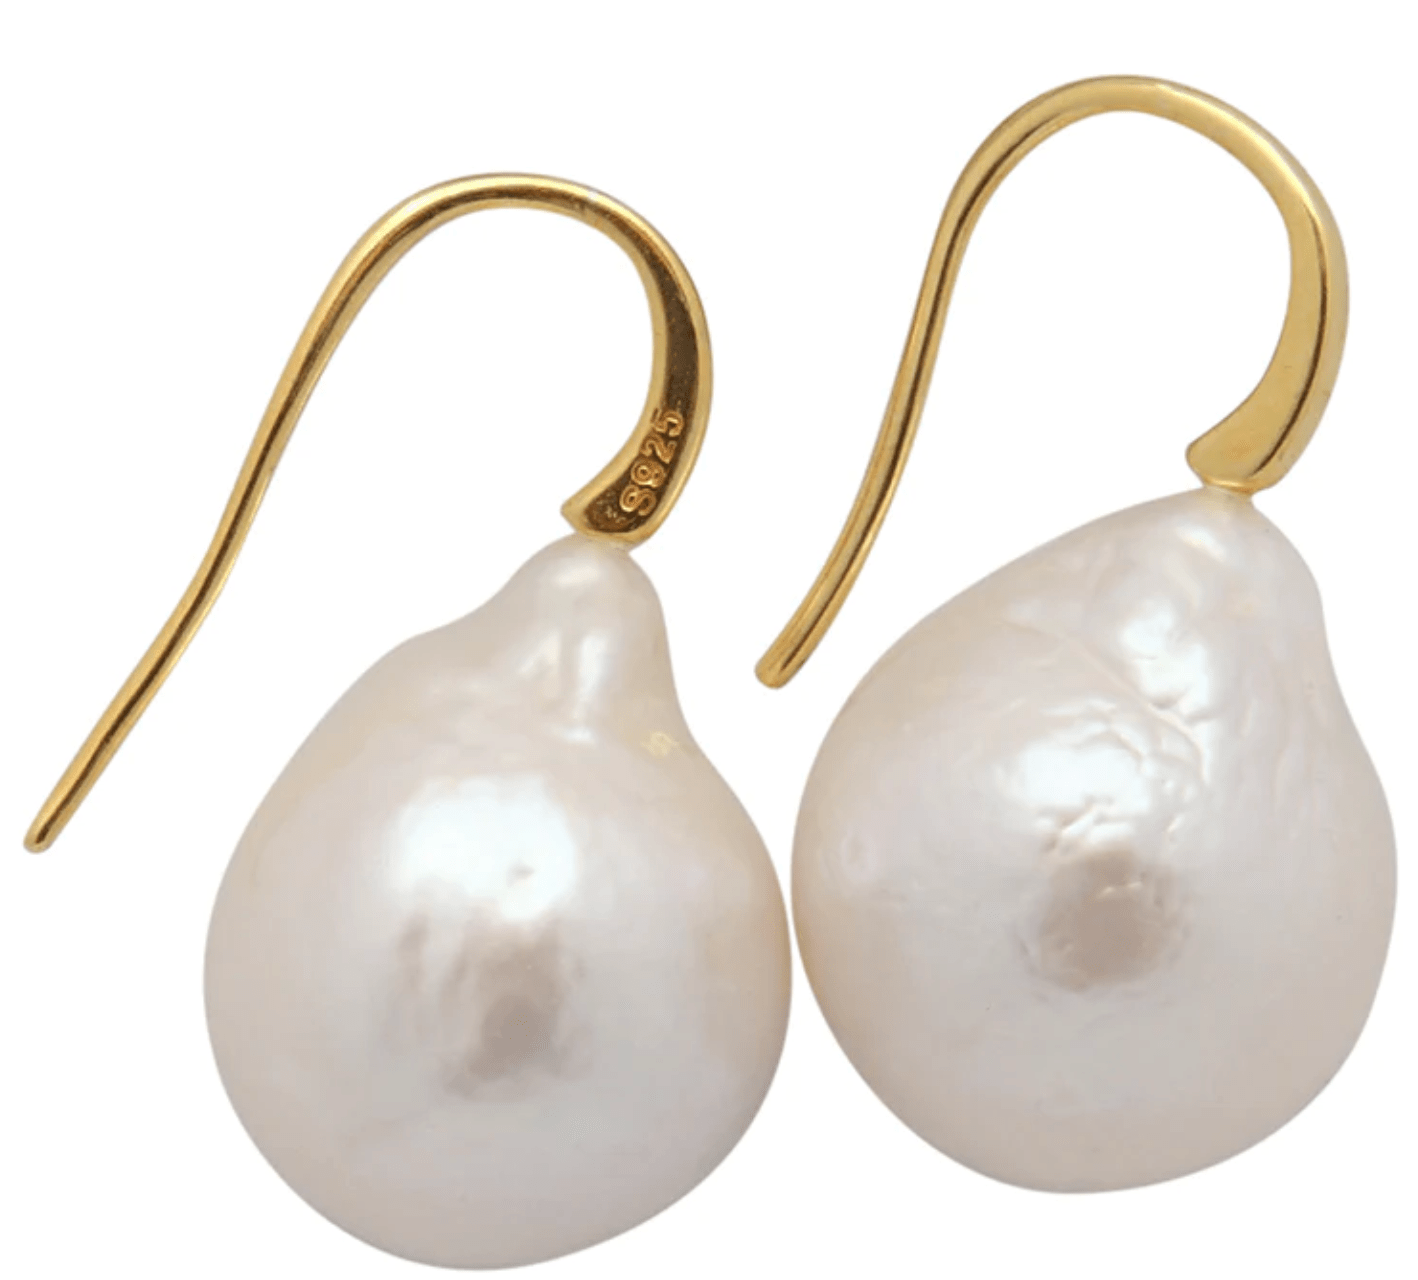 Edison Pearl Drop Earrings in Gold - The French Shoppe